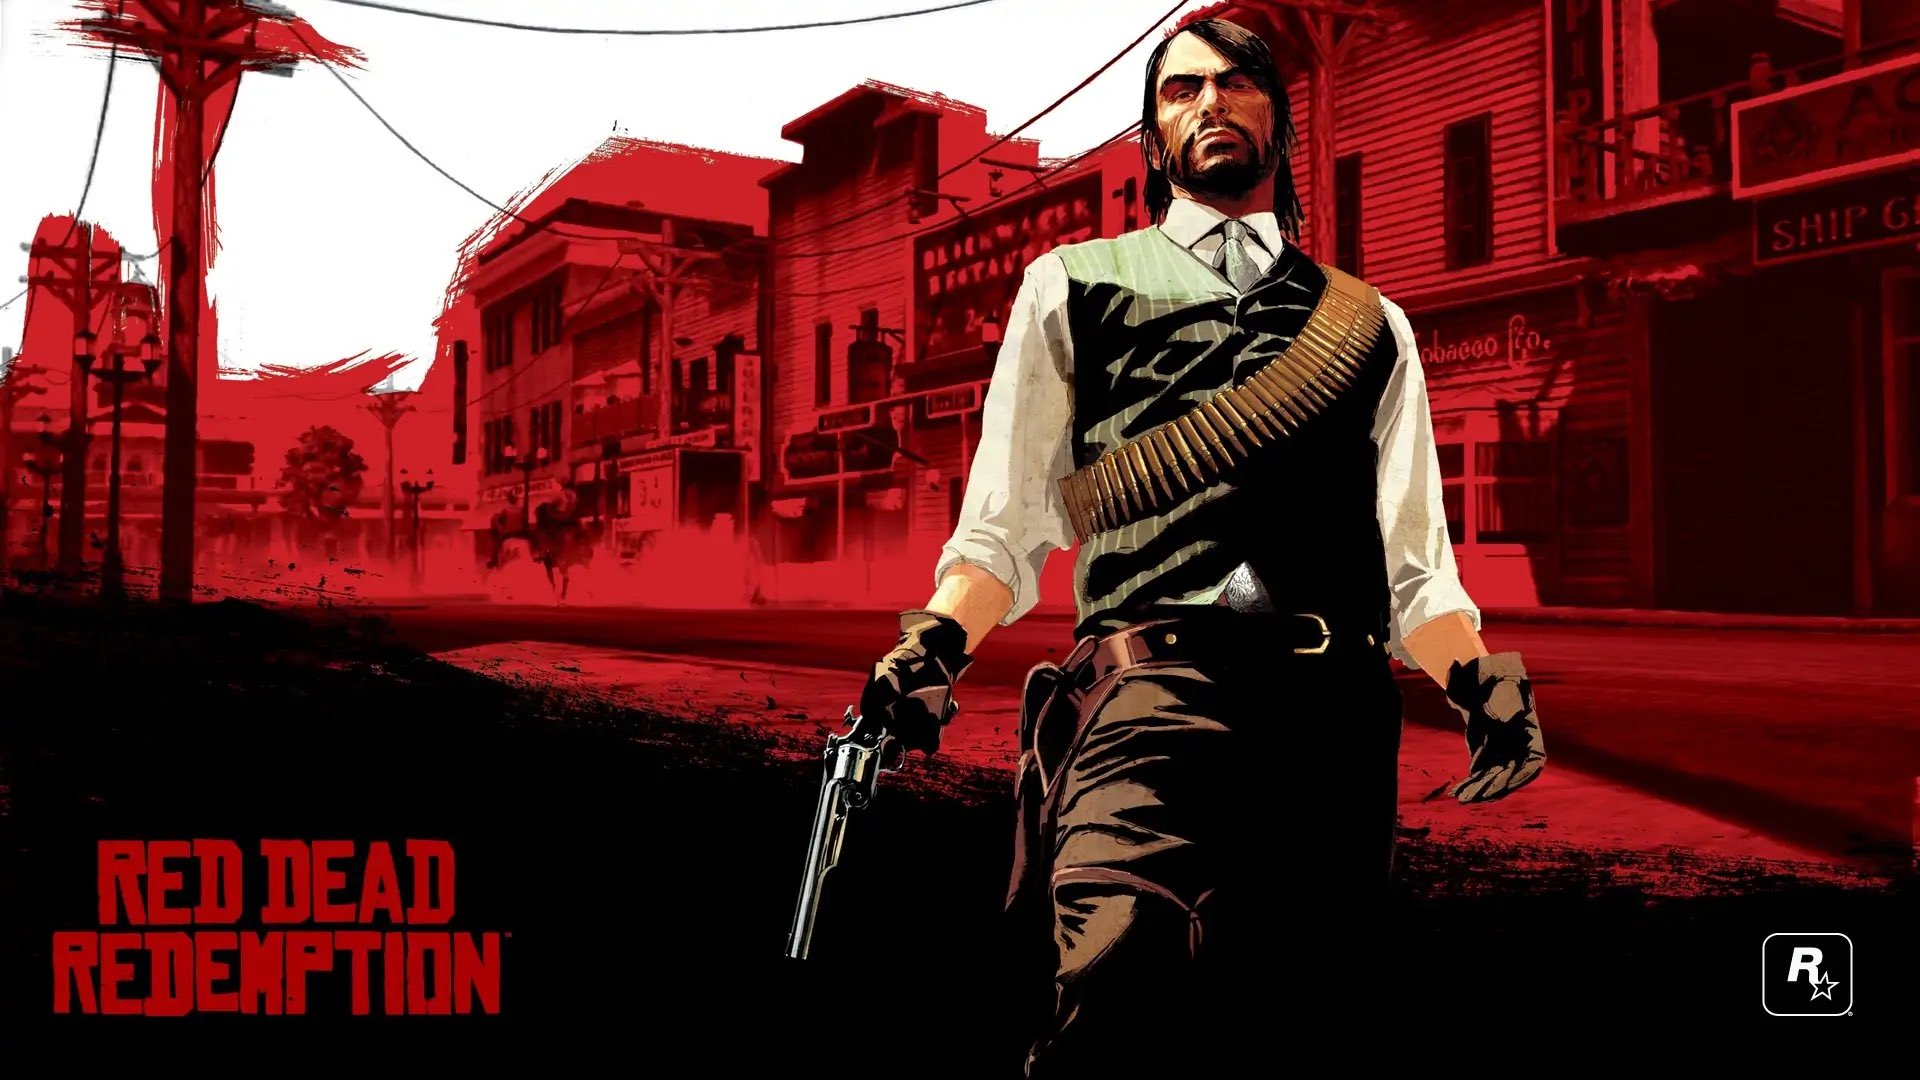 Red Dead Redemption Remaster Could be Revealed in August, It's Claimed -  Insider Gaming